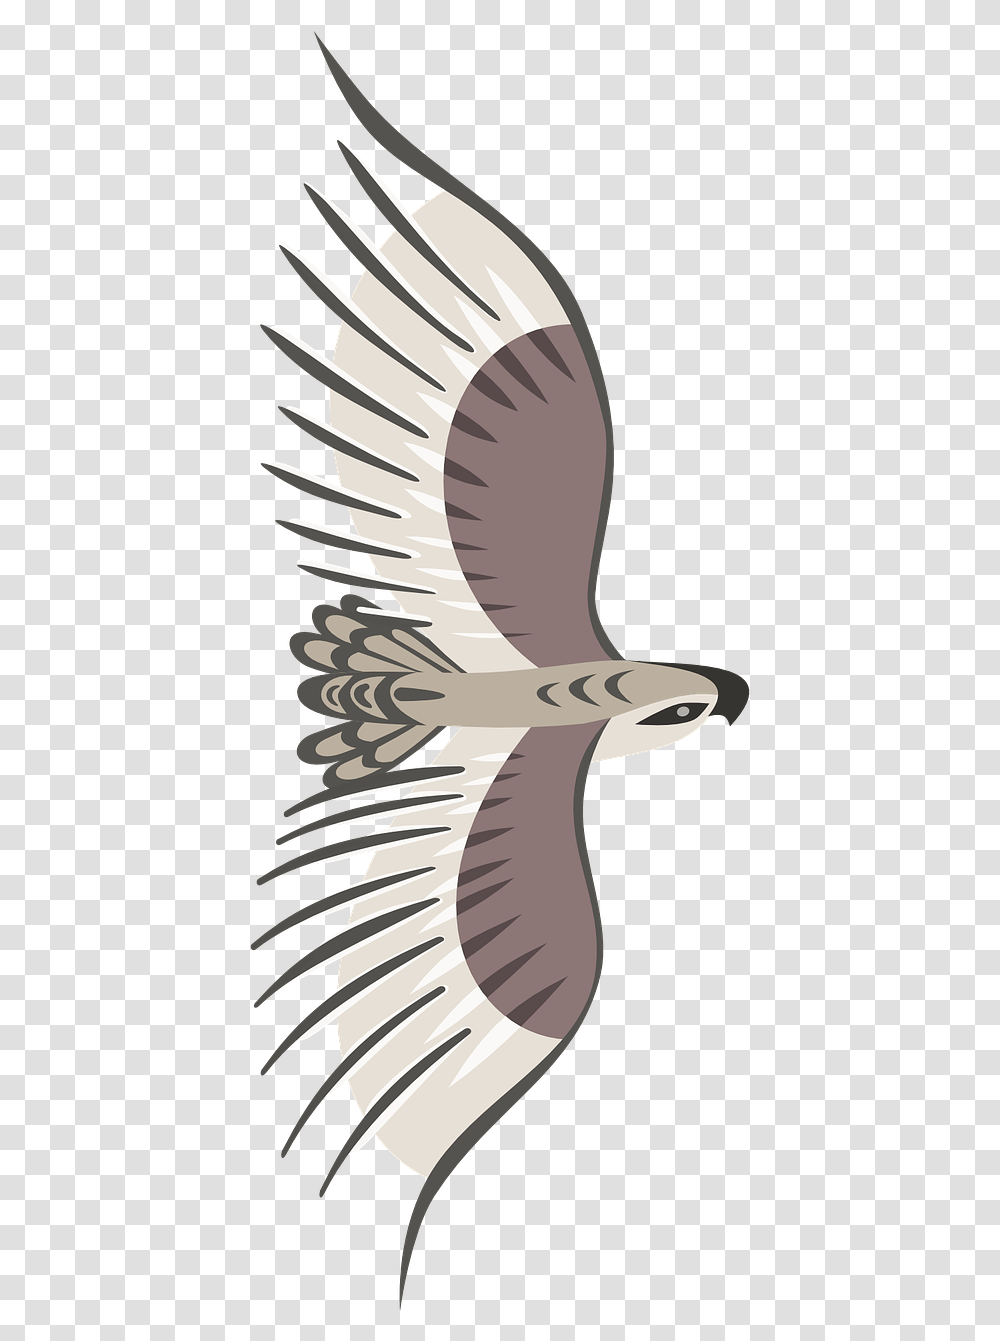 Flying Bird Top View, Vulture, Animal, Eagle, Condor Transparent Png